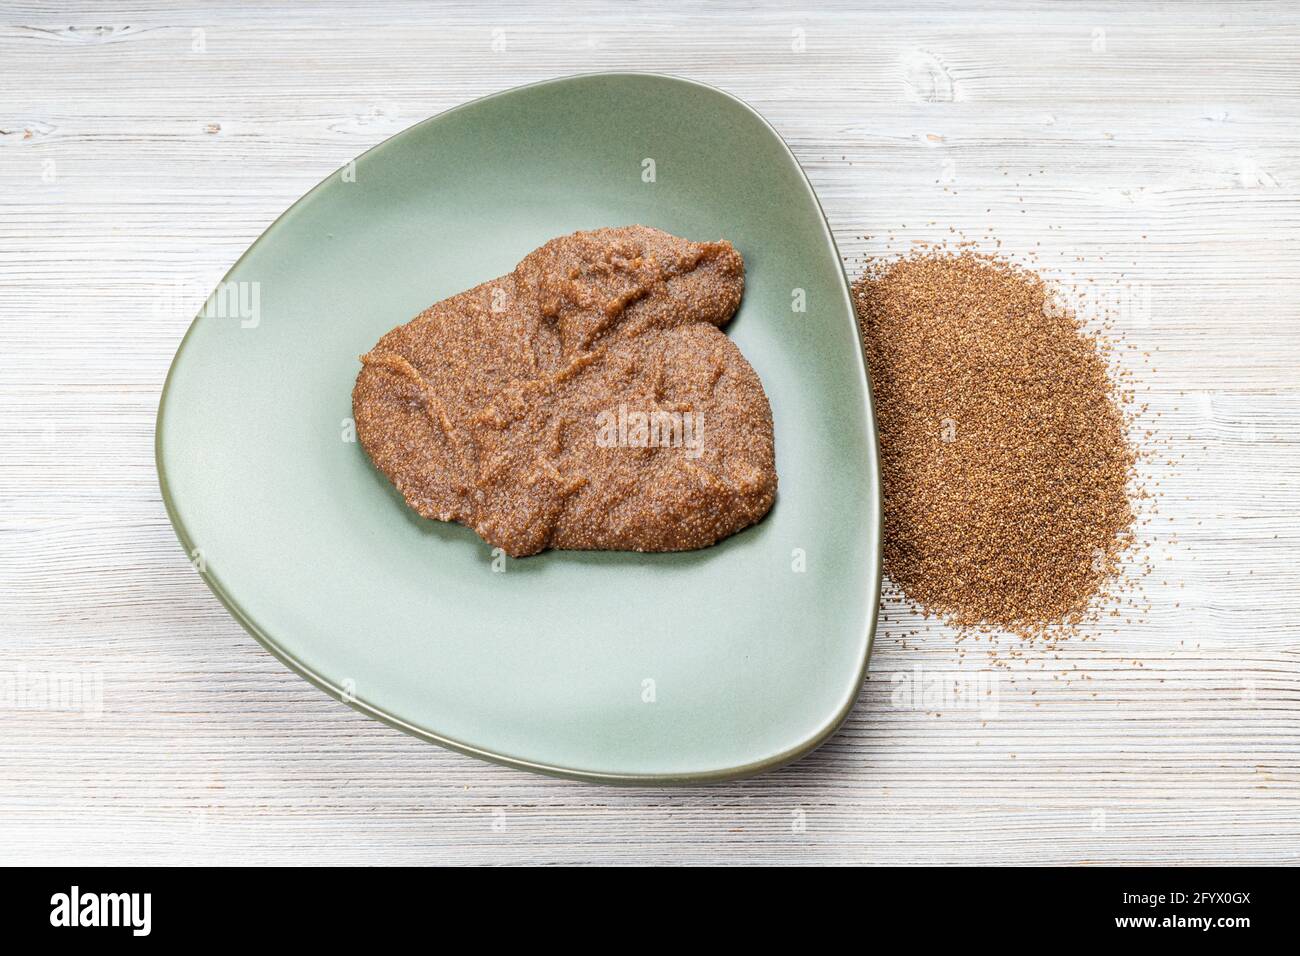 teff grains and boiled porridge on green plate on wooden table Stock Photo